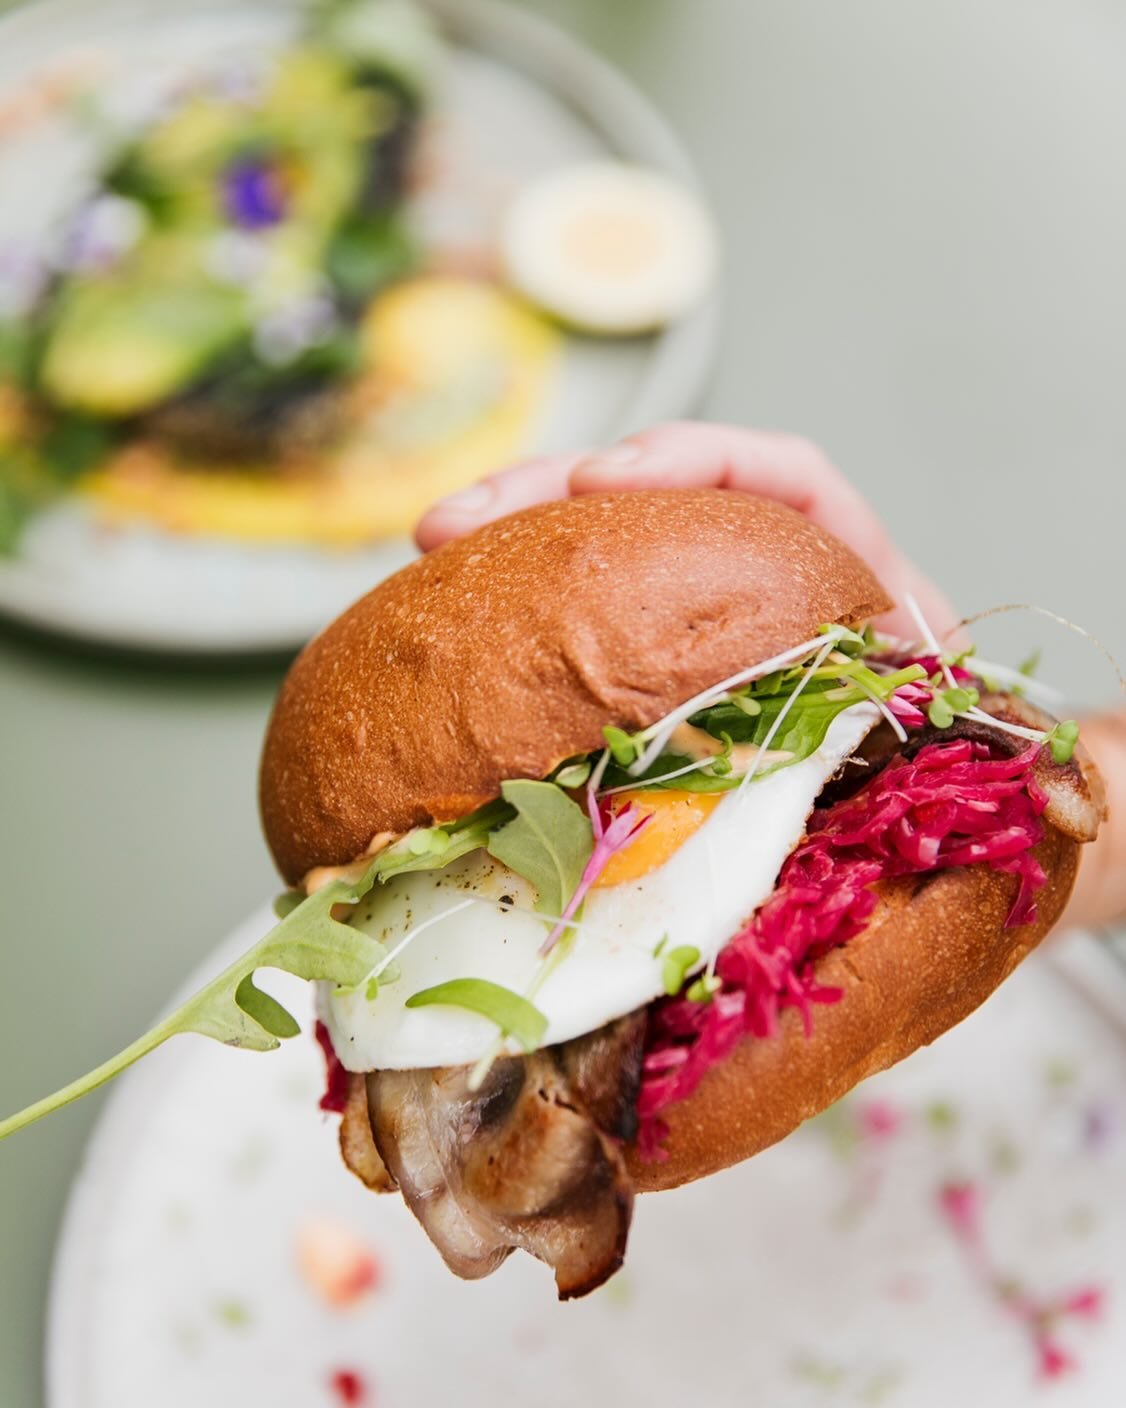 Craving something satisfying? Try our bacon &amp; Egg Bun, red cabbage
kimchi, chipotle mayo, fresh greens
#vanillafood #organiccafe